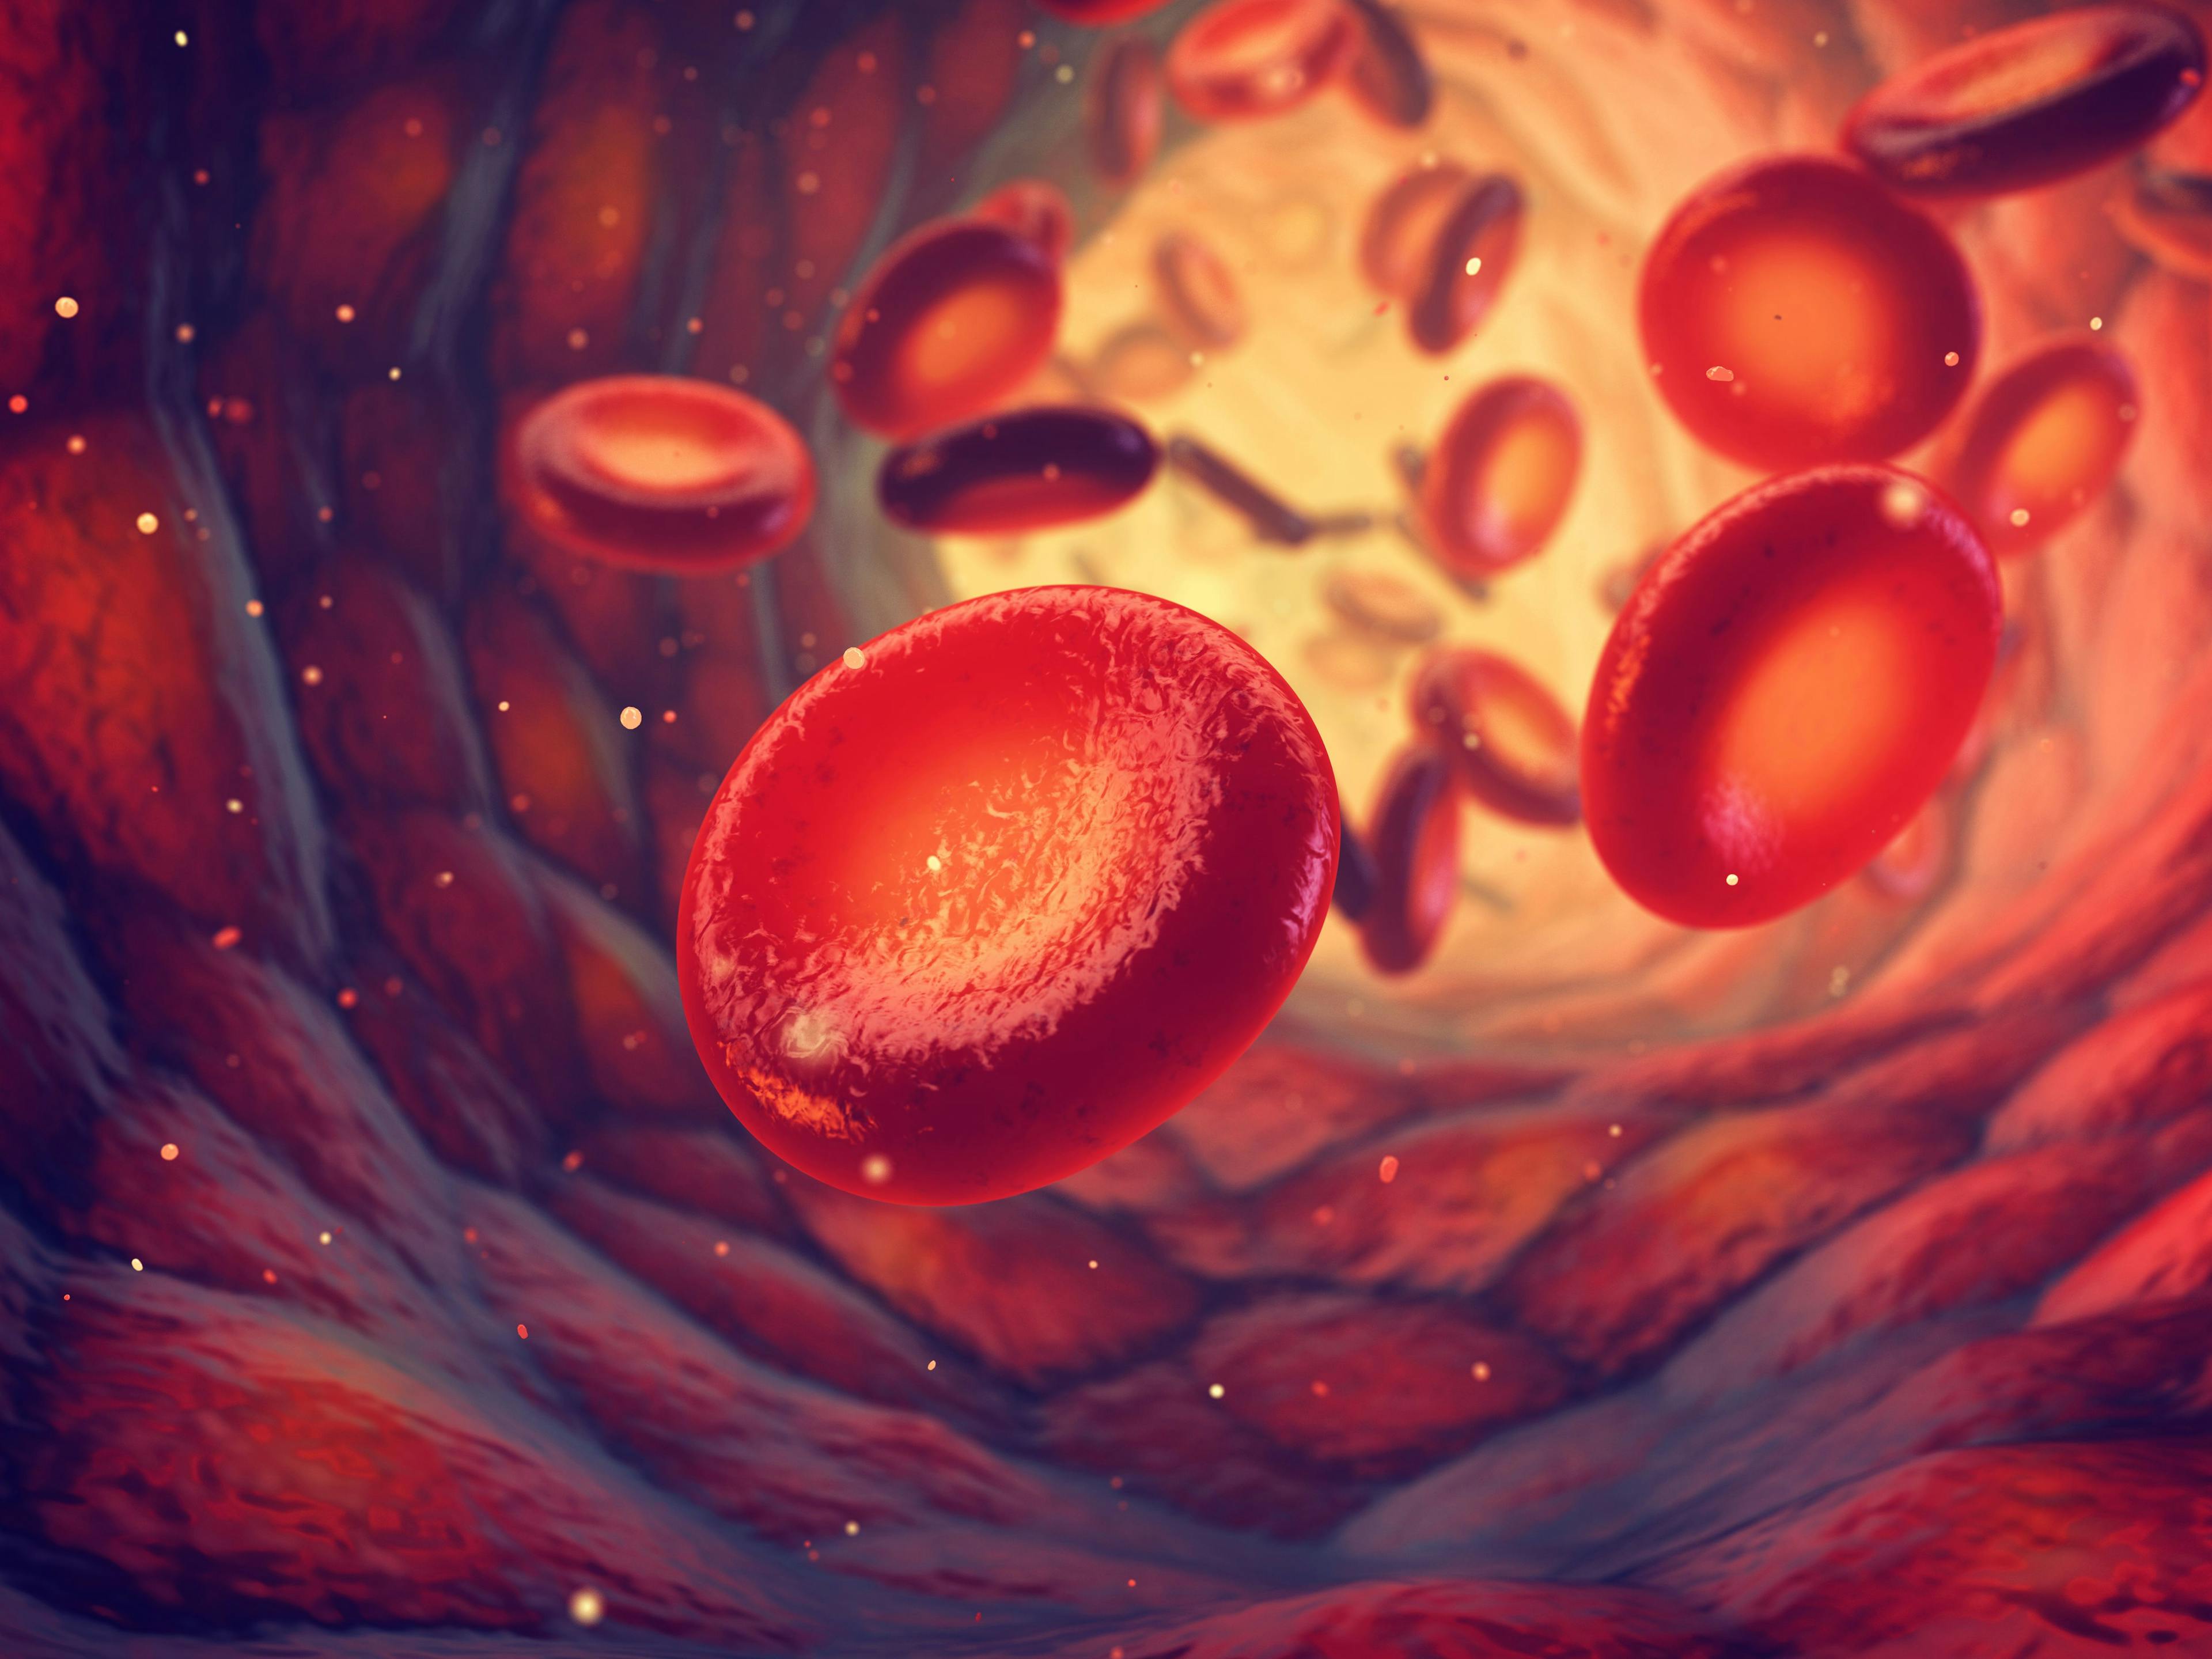 Red Blood Cells Play Significant Role in Immune System, Bind Cell-Free DNA